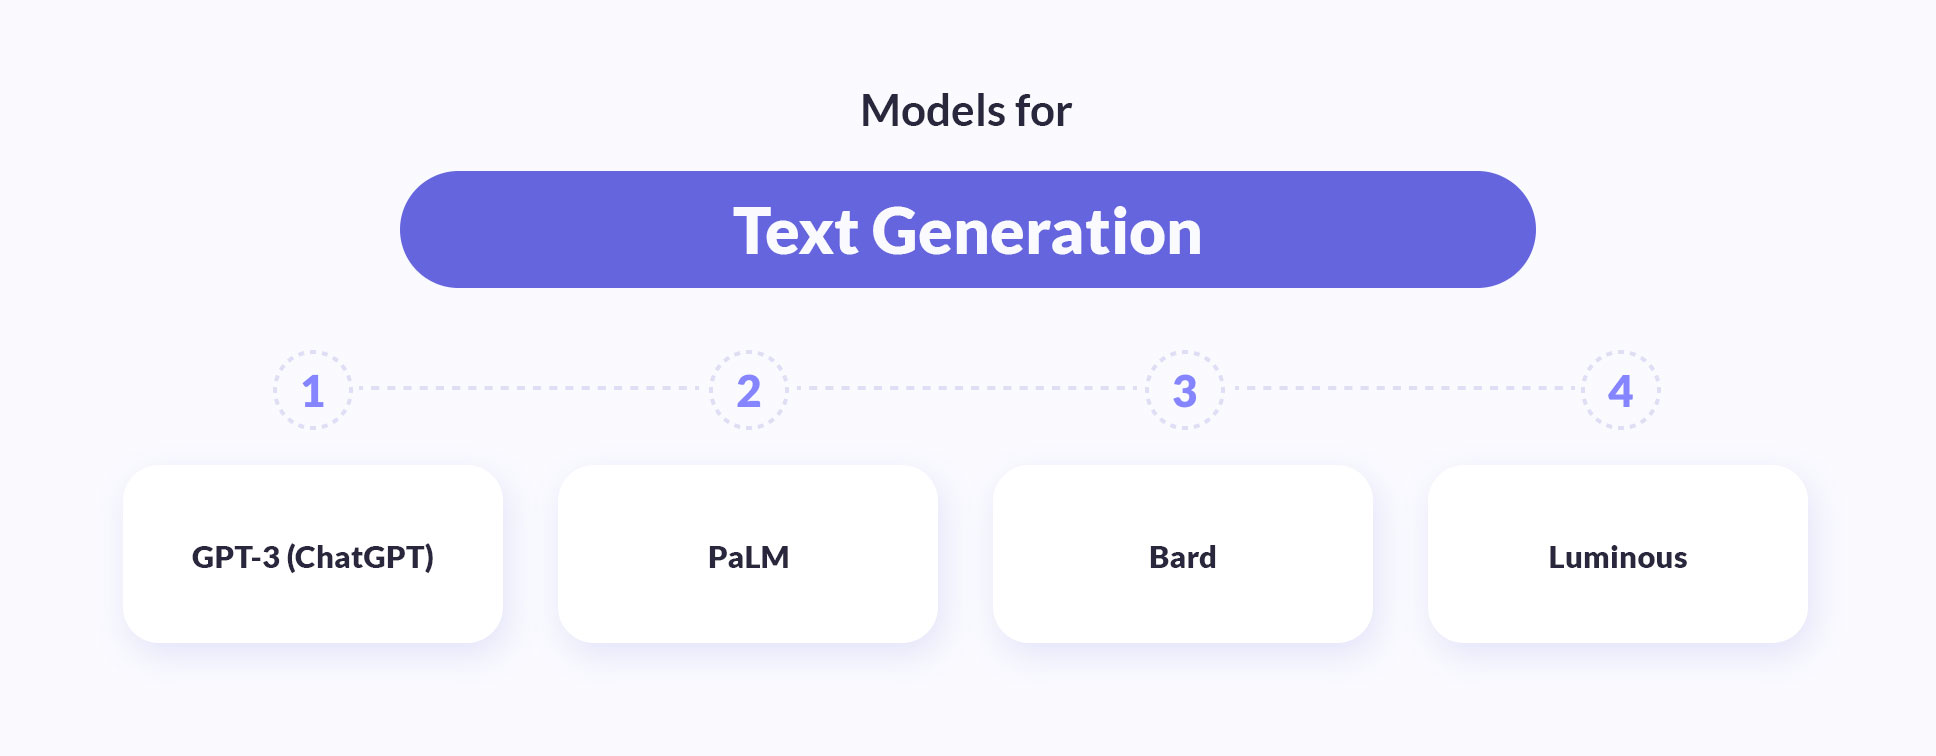 Models for text generation